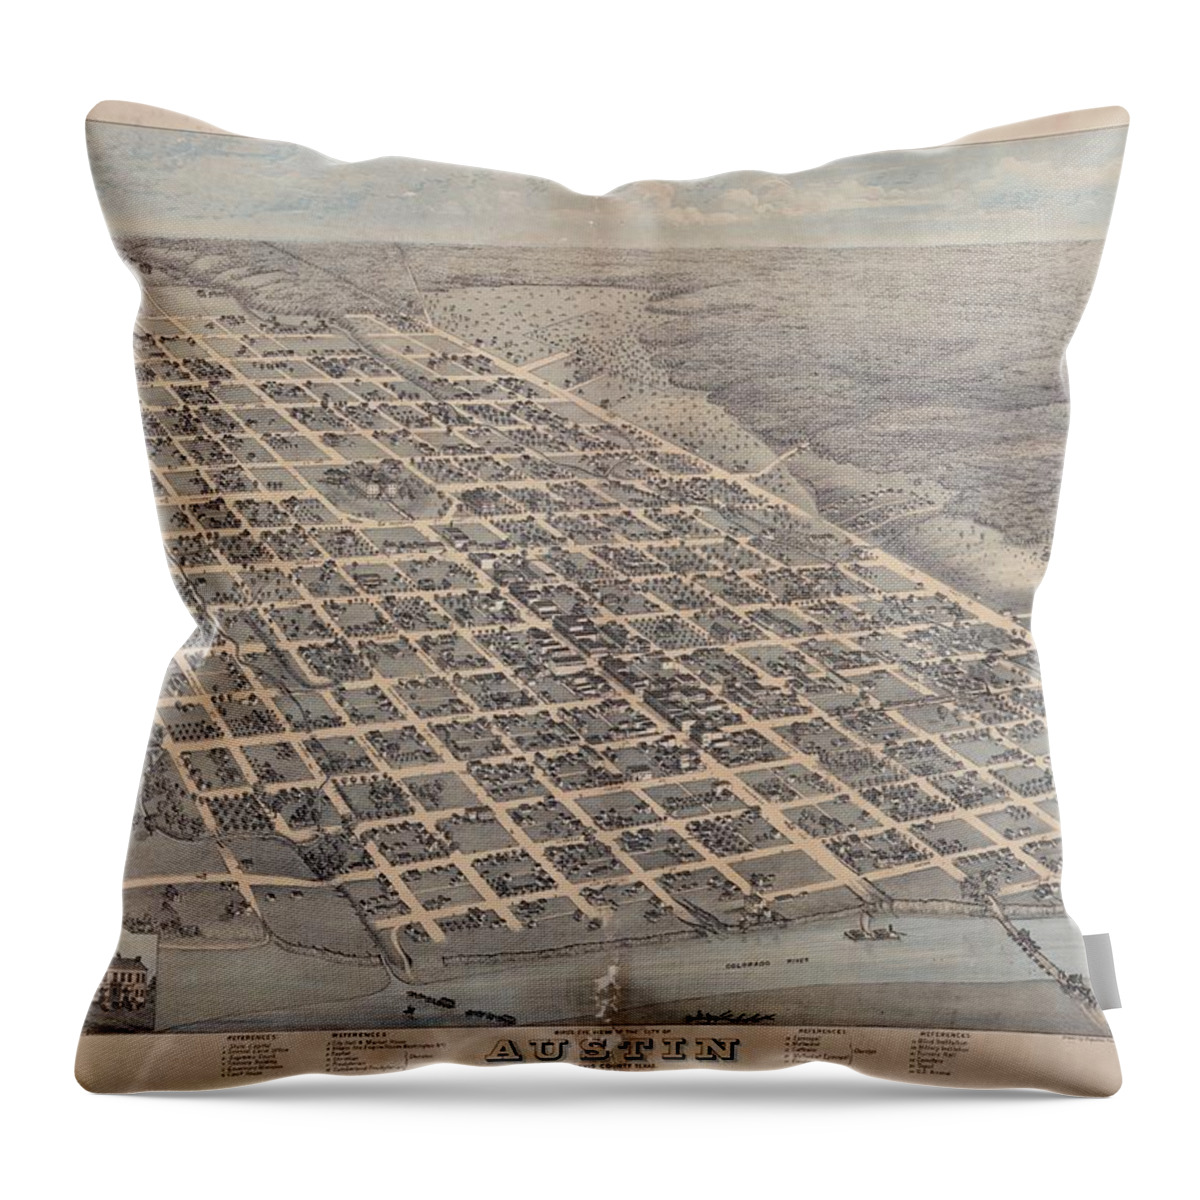 Antique Birds Eye View Map Of Austin Throw Pillow featuring the drawing Antique Maps - Old Cartographic maps - Antique Birds Eye View Map Of The City Of Austin, Texas, 1873 by Studio Grafiikka